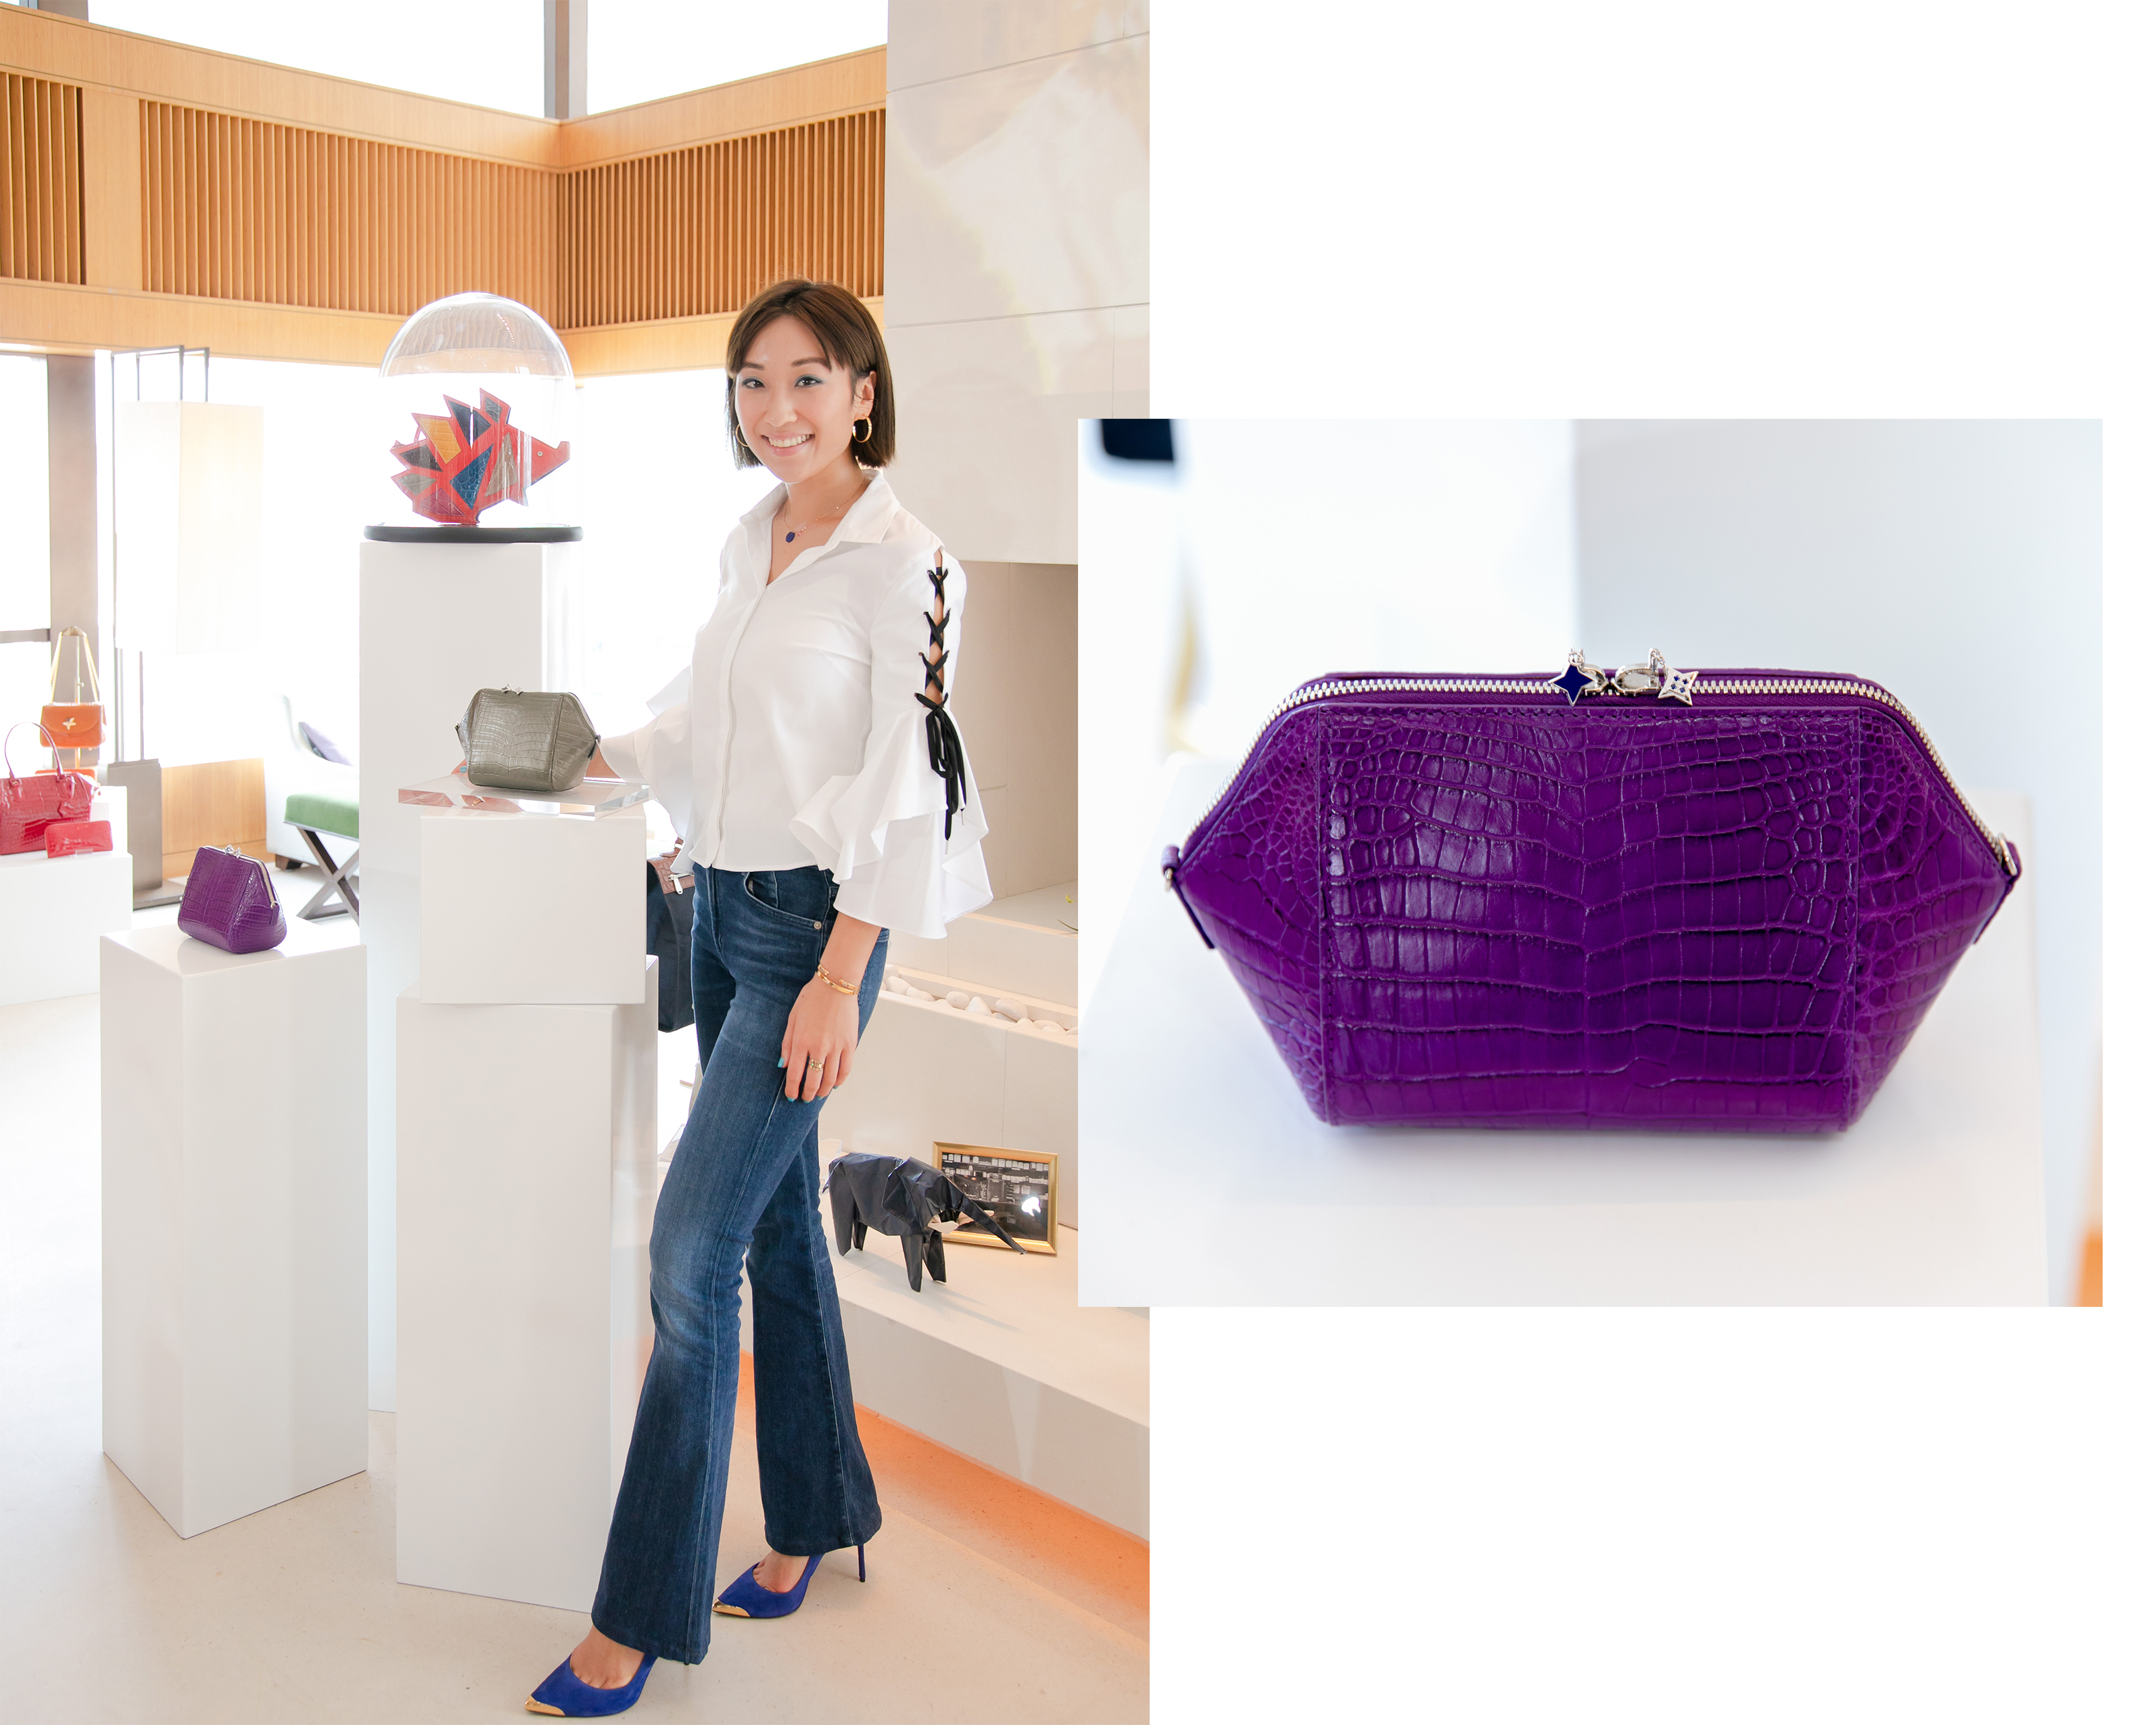 Florence Tsai and her origami clutch in collaboration with Ethan K